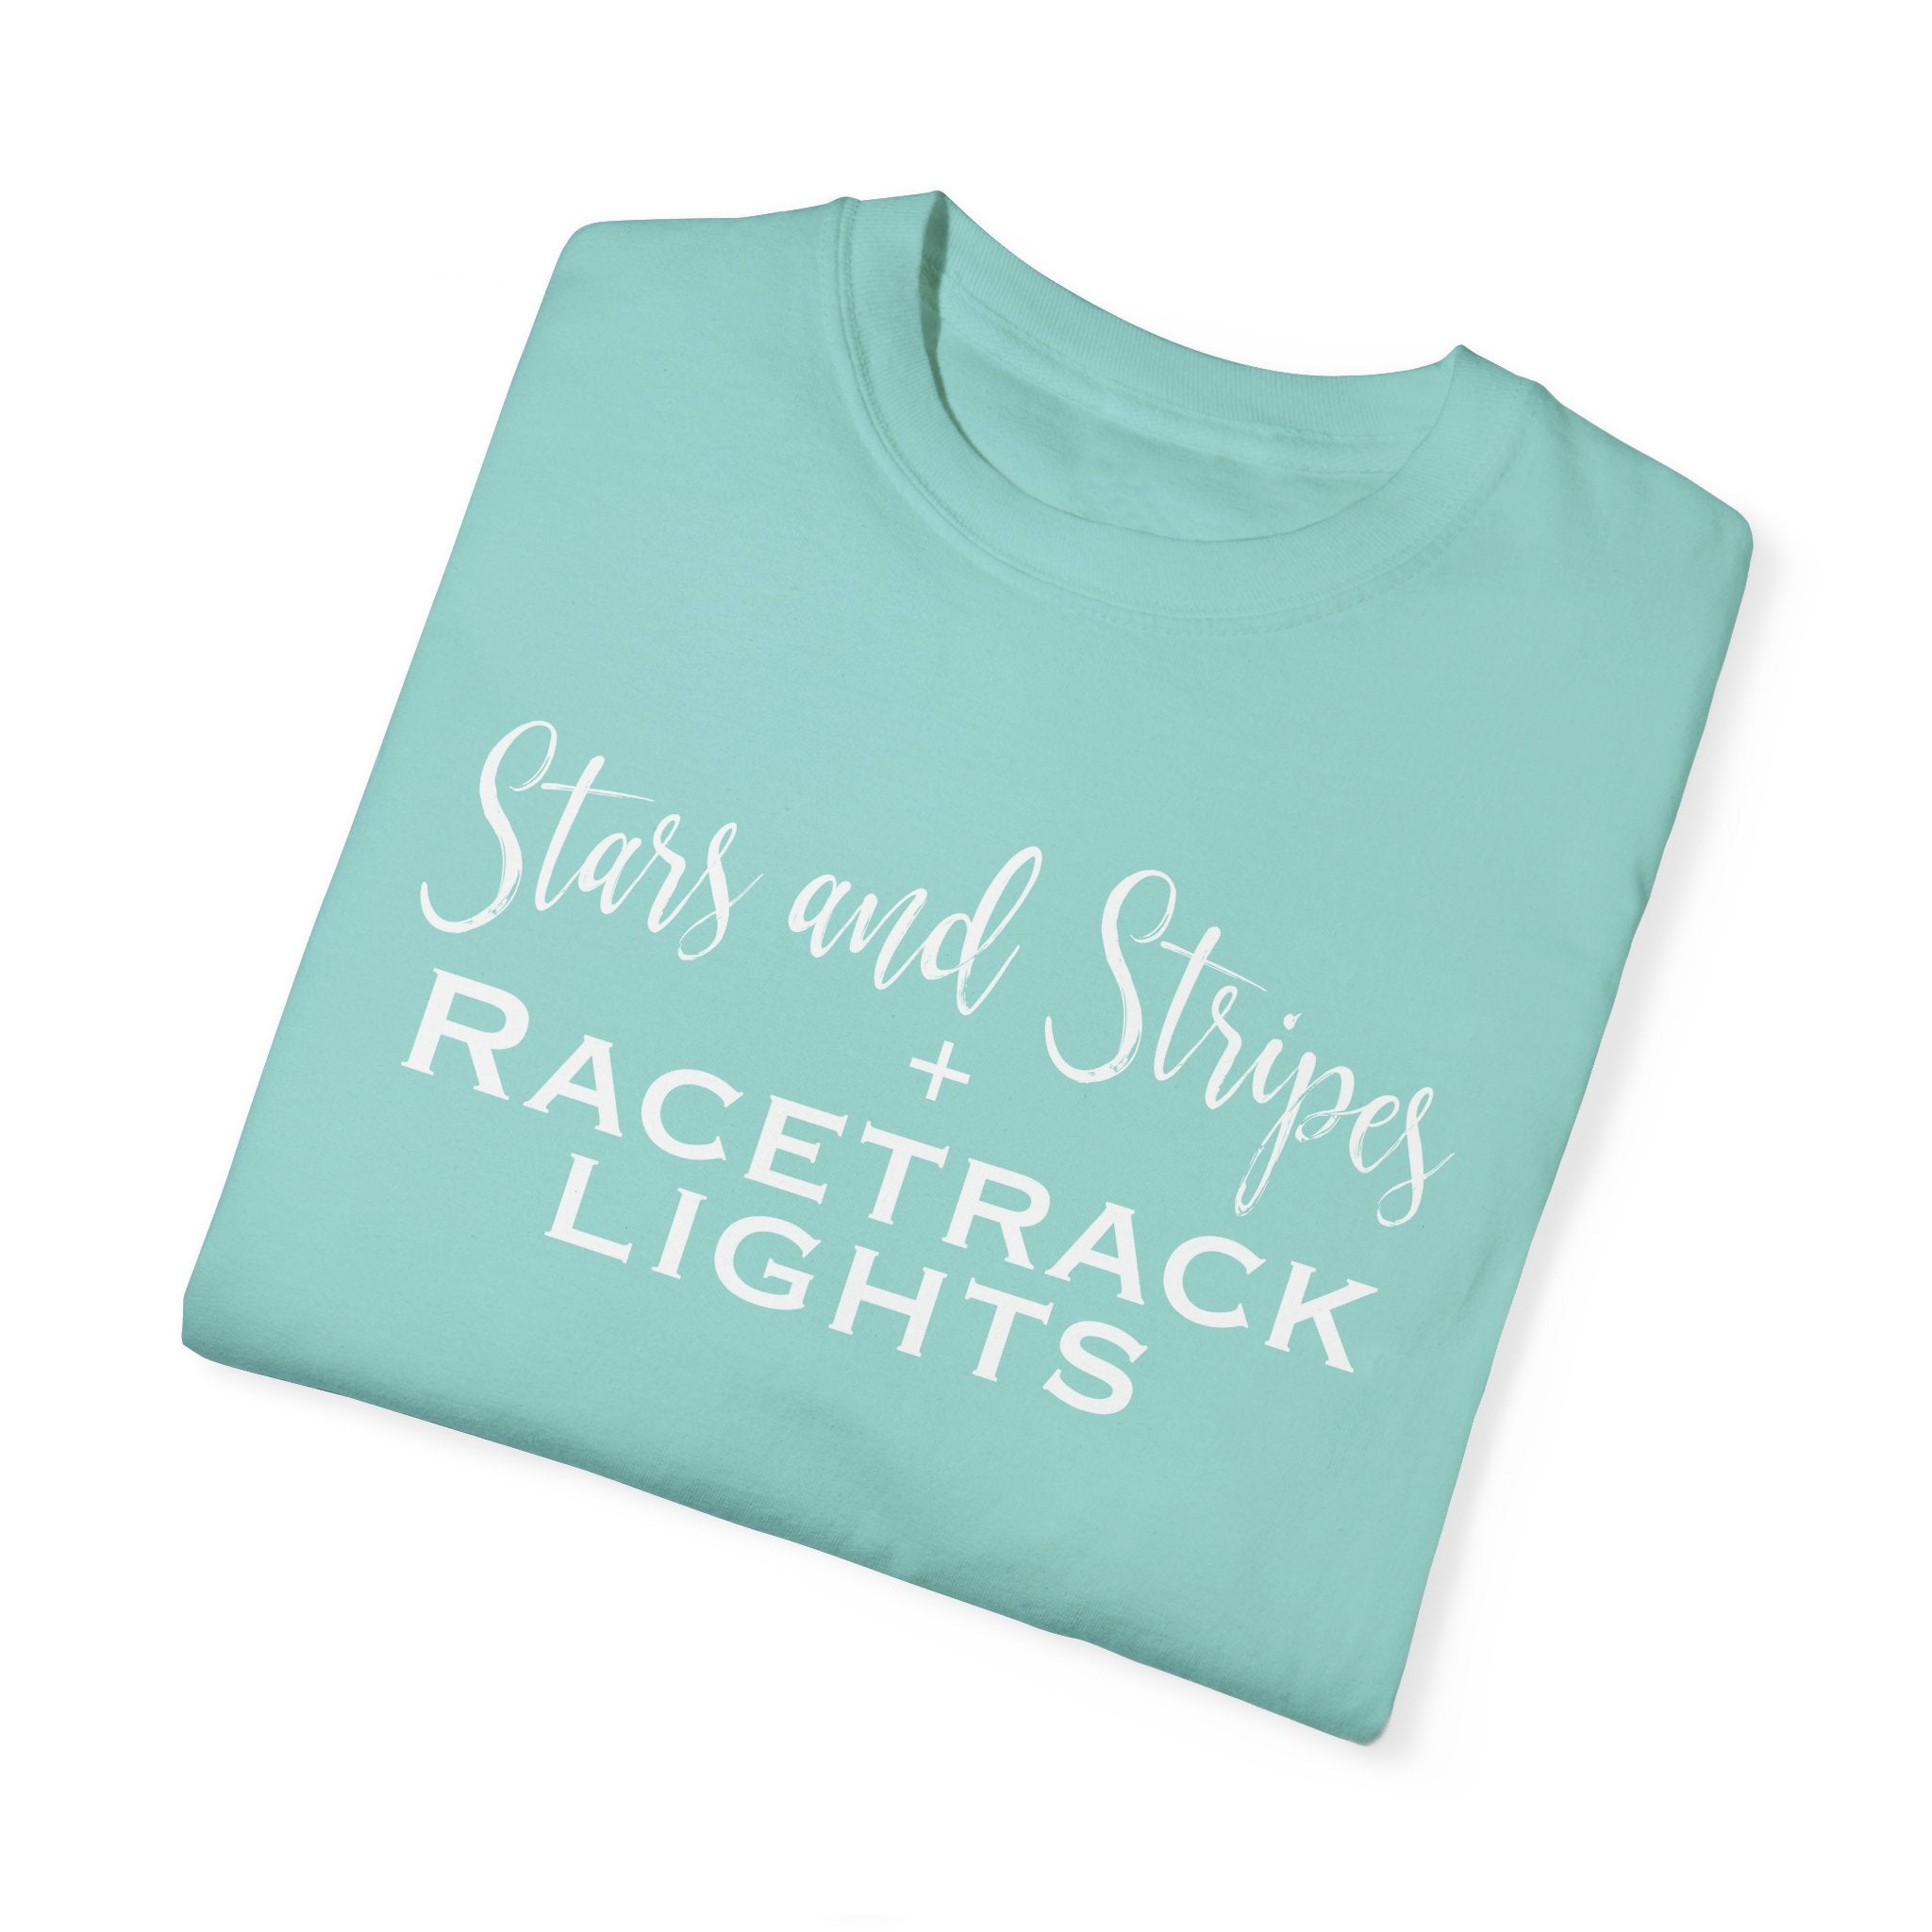 Stars and Stripes and Racetrack Lights Heavyweight Ladies Racing Tee